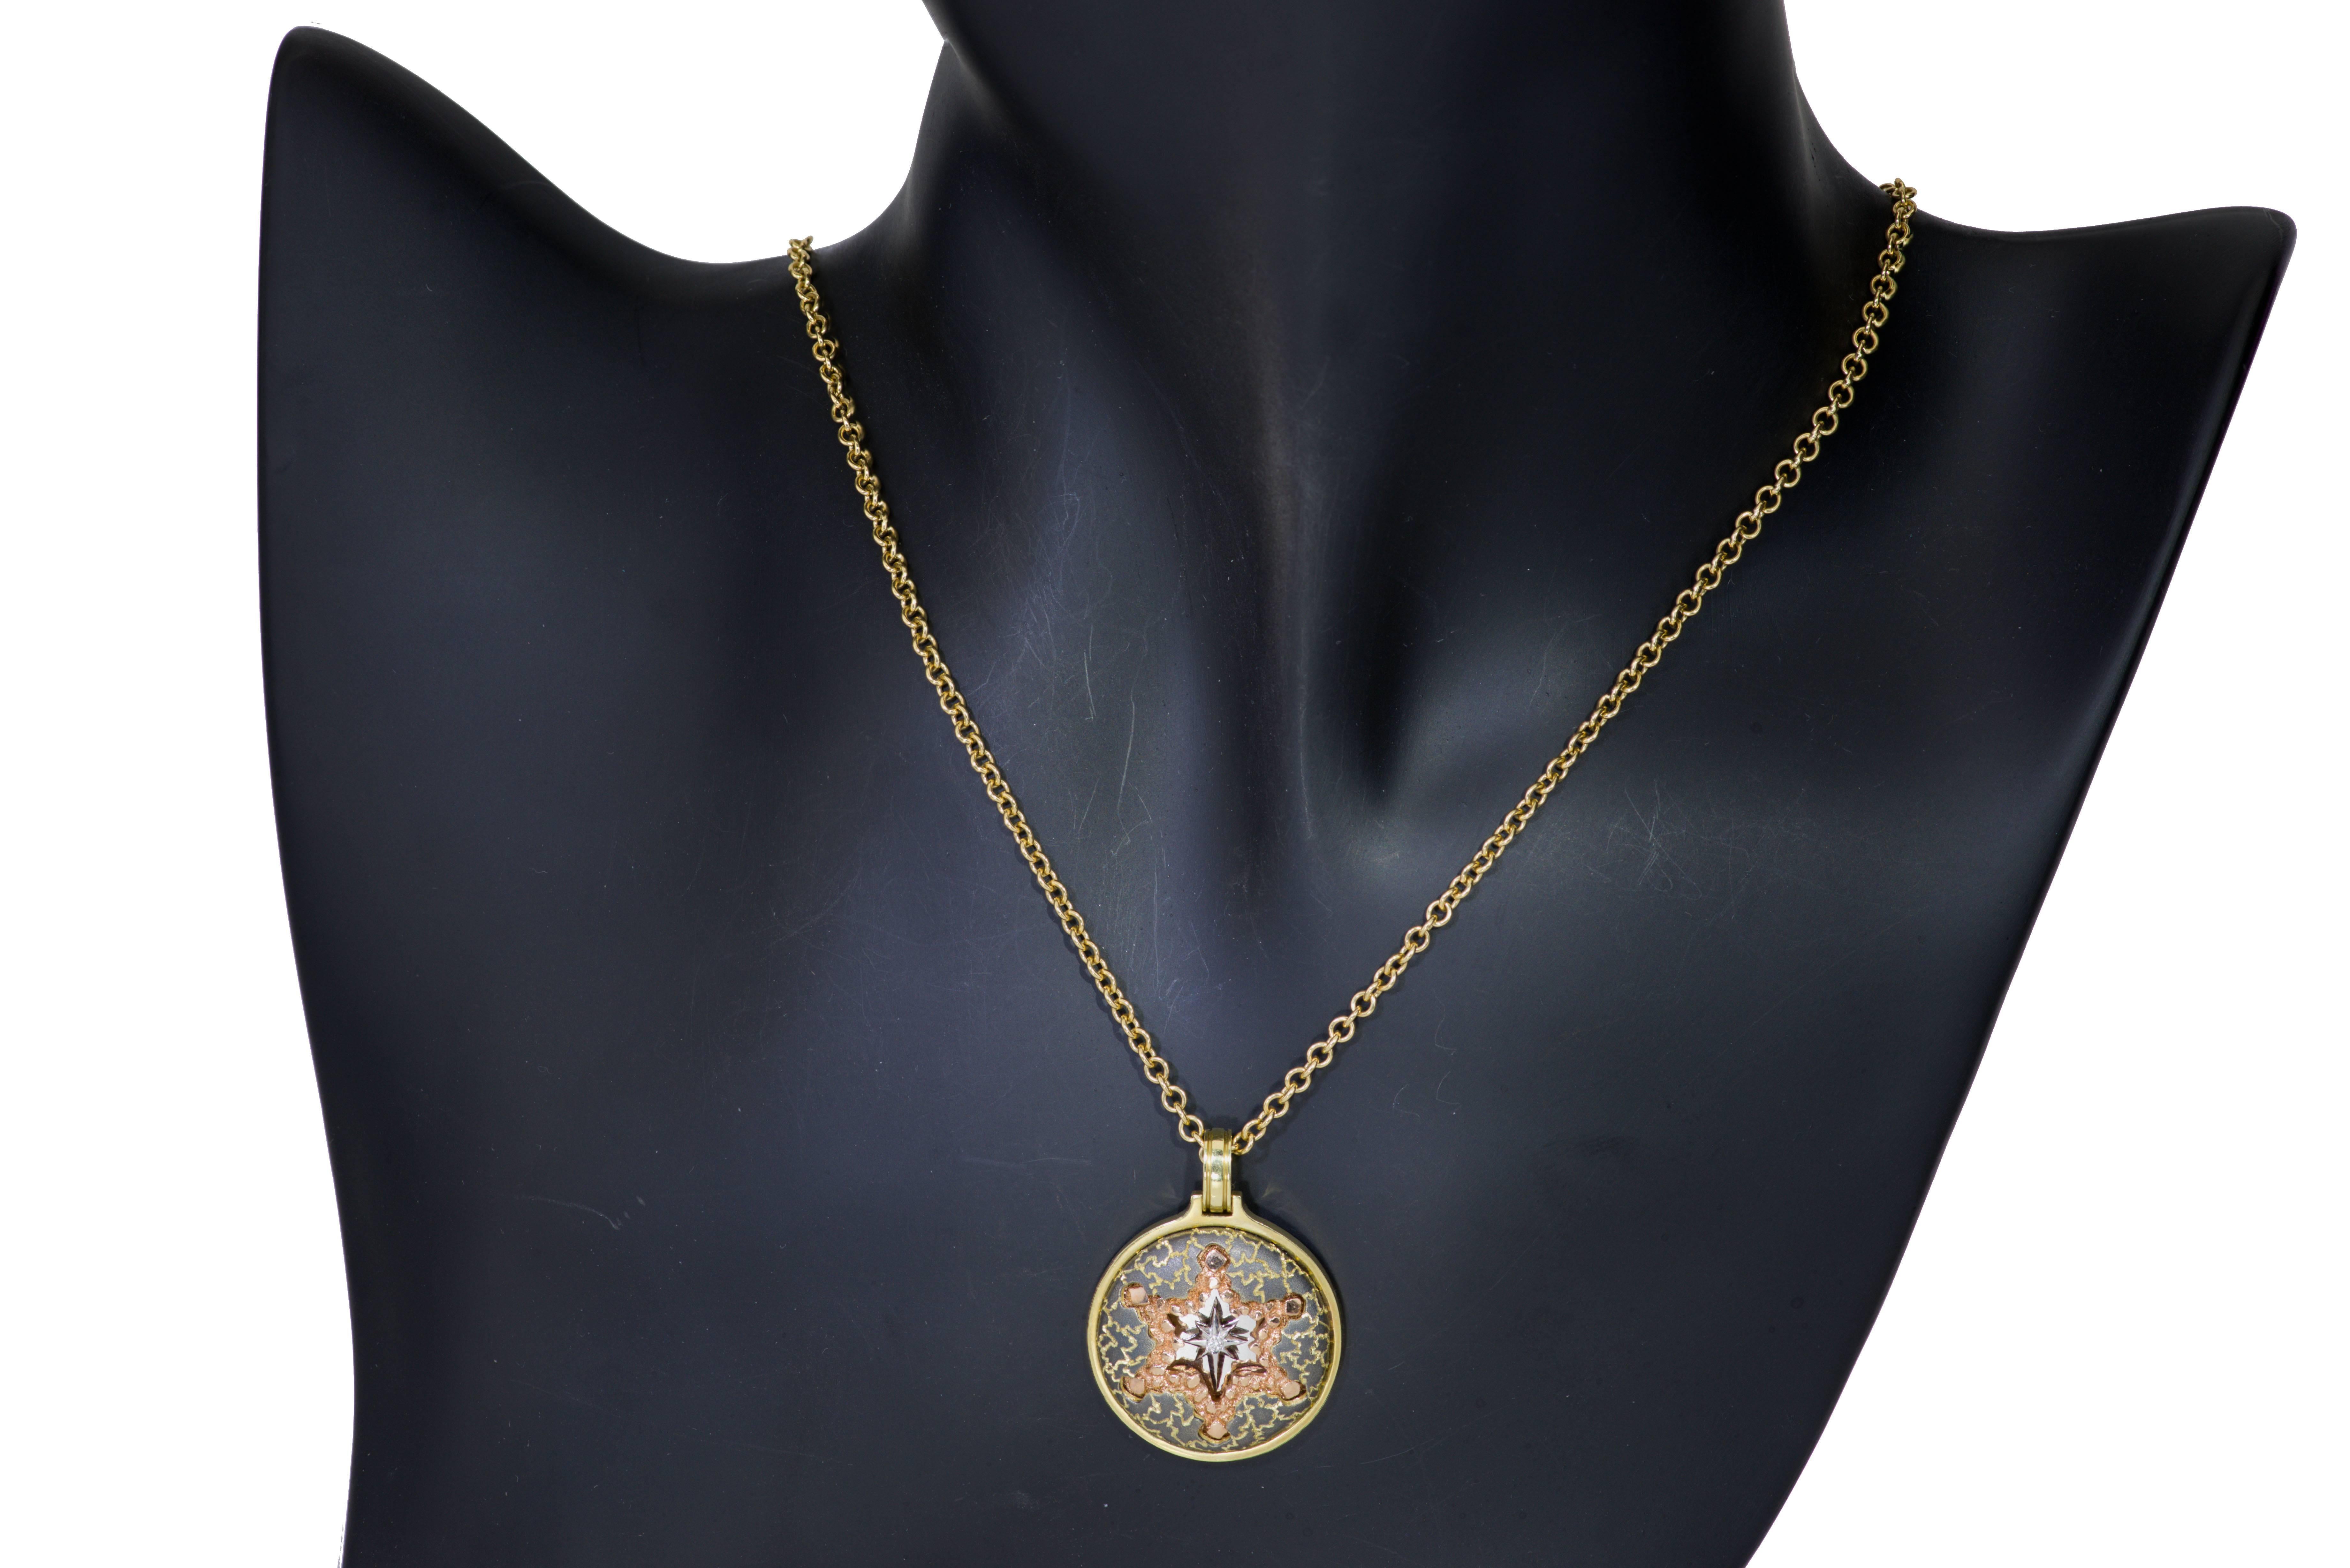 Women's or Men's Alex Soldier Diamond Gold Star Pendant Necklace On Chain Handmade in NYC Ltd Ed